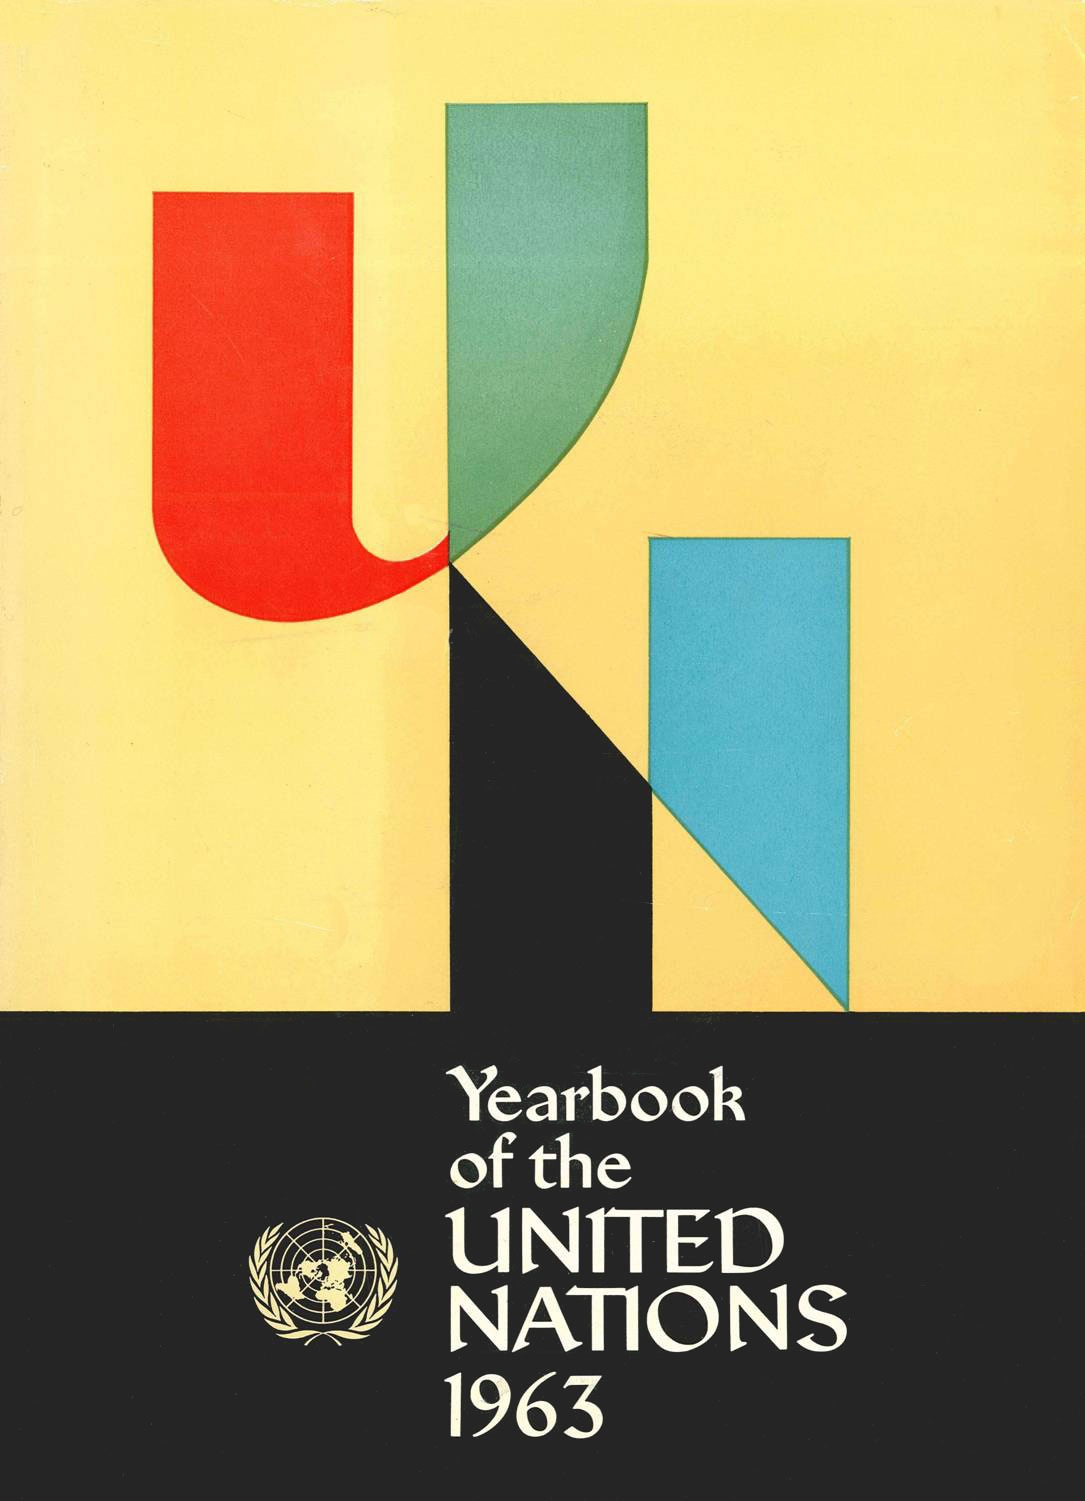 image of Yearbook of the United Nations 1963